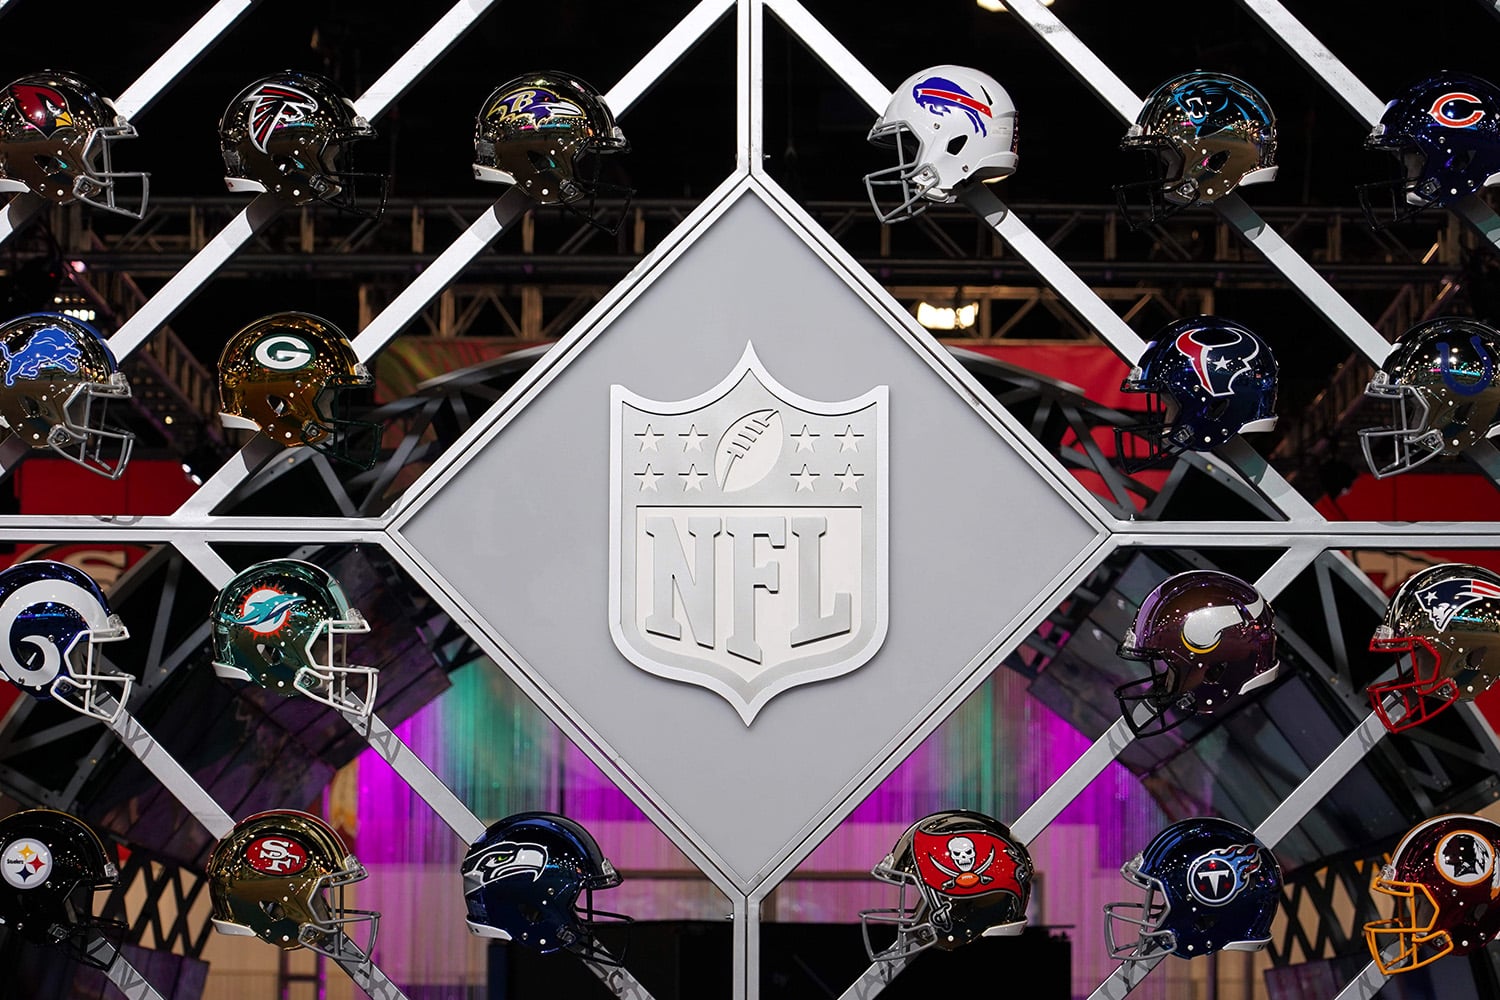 A view of the NFL logo and team helmets